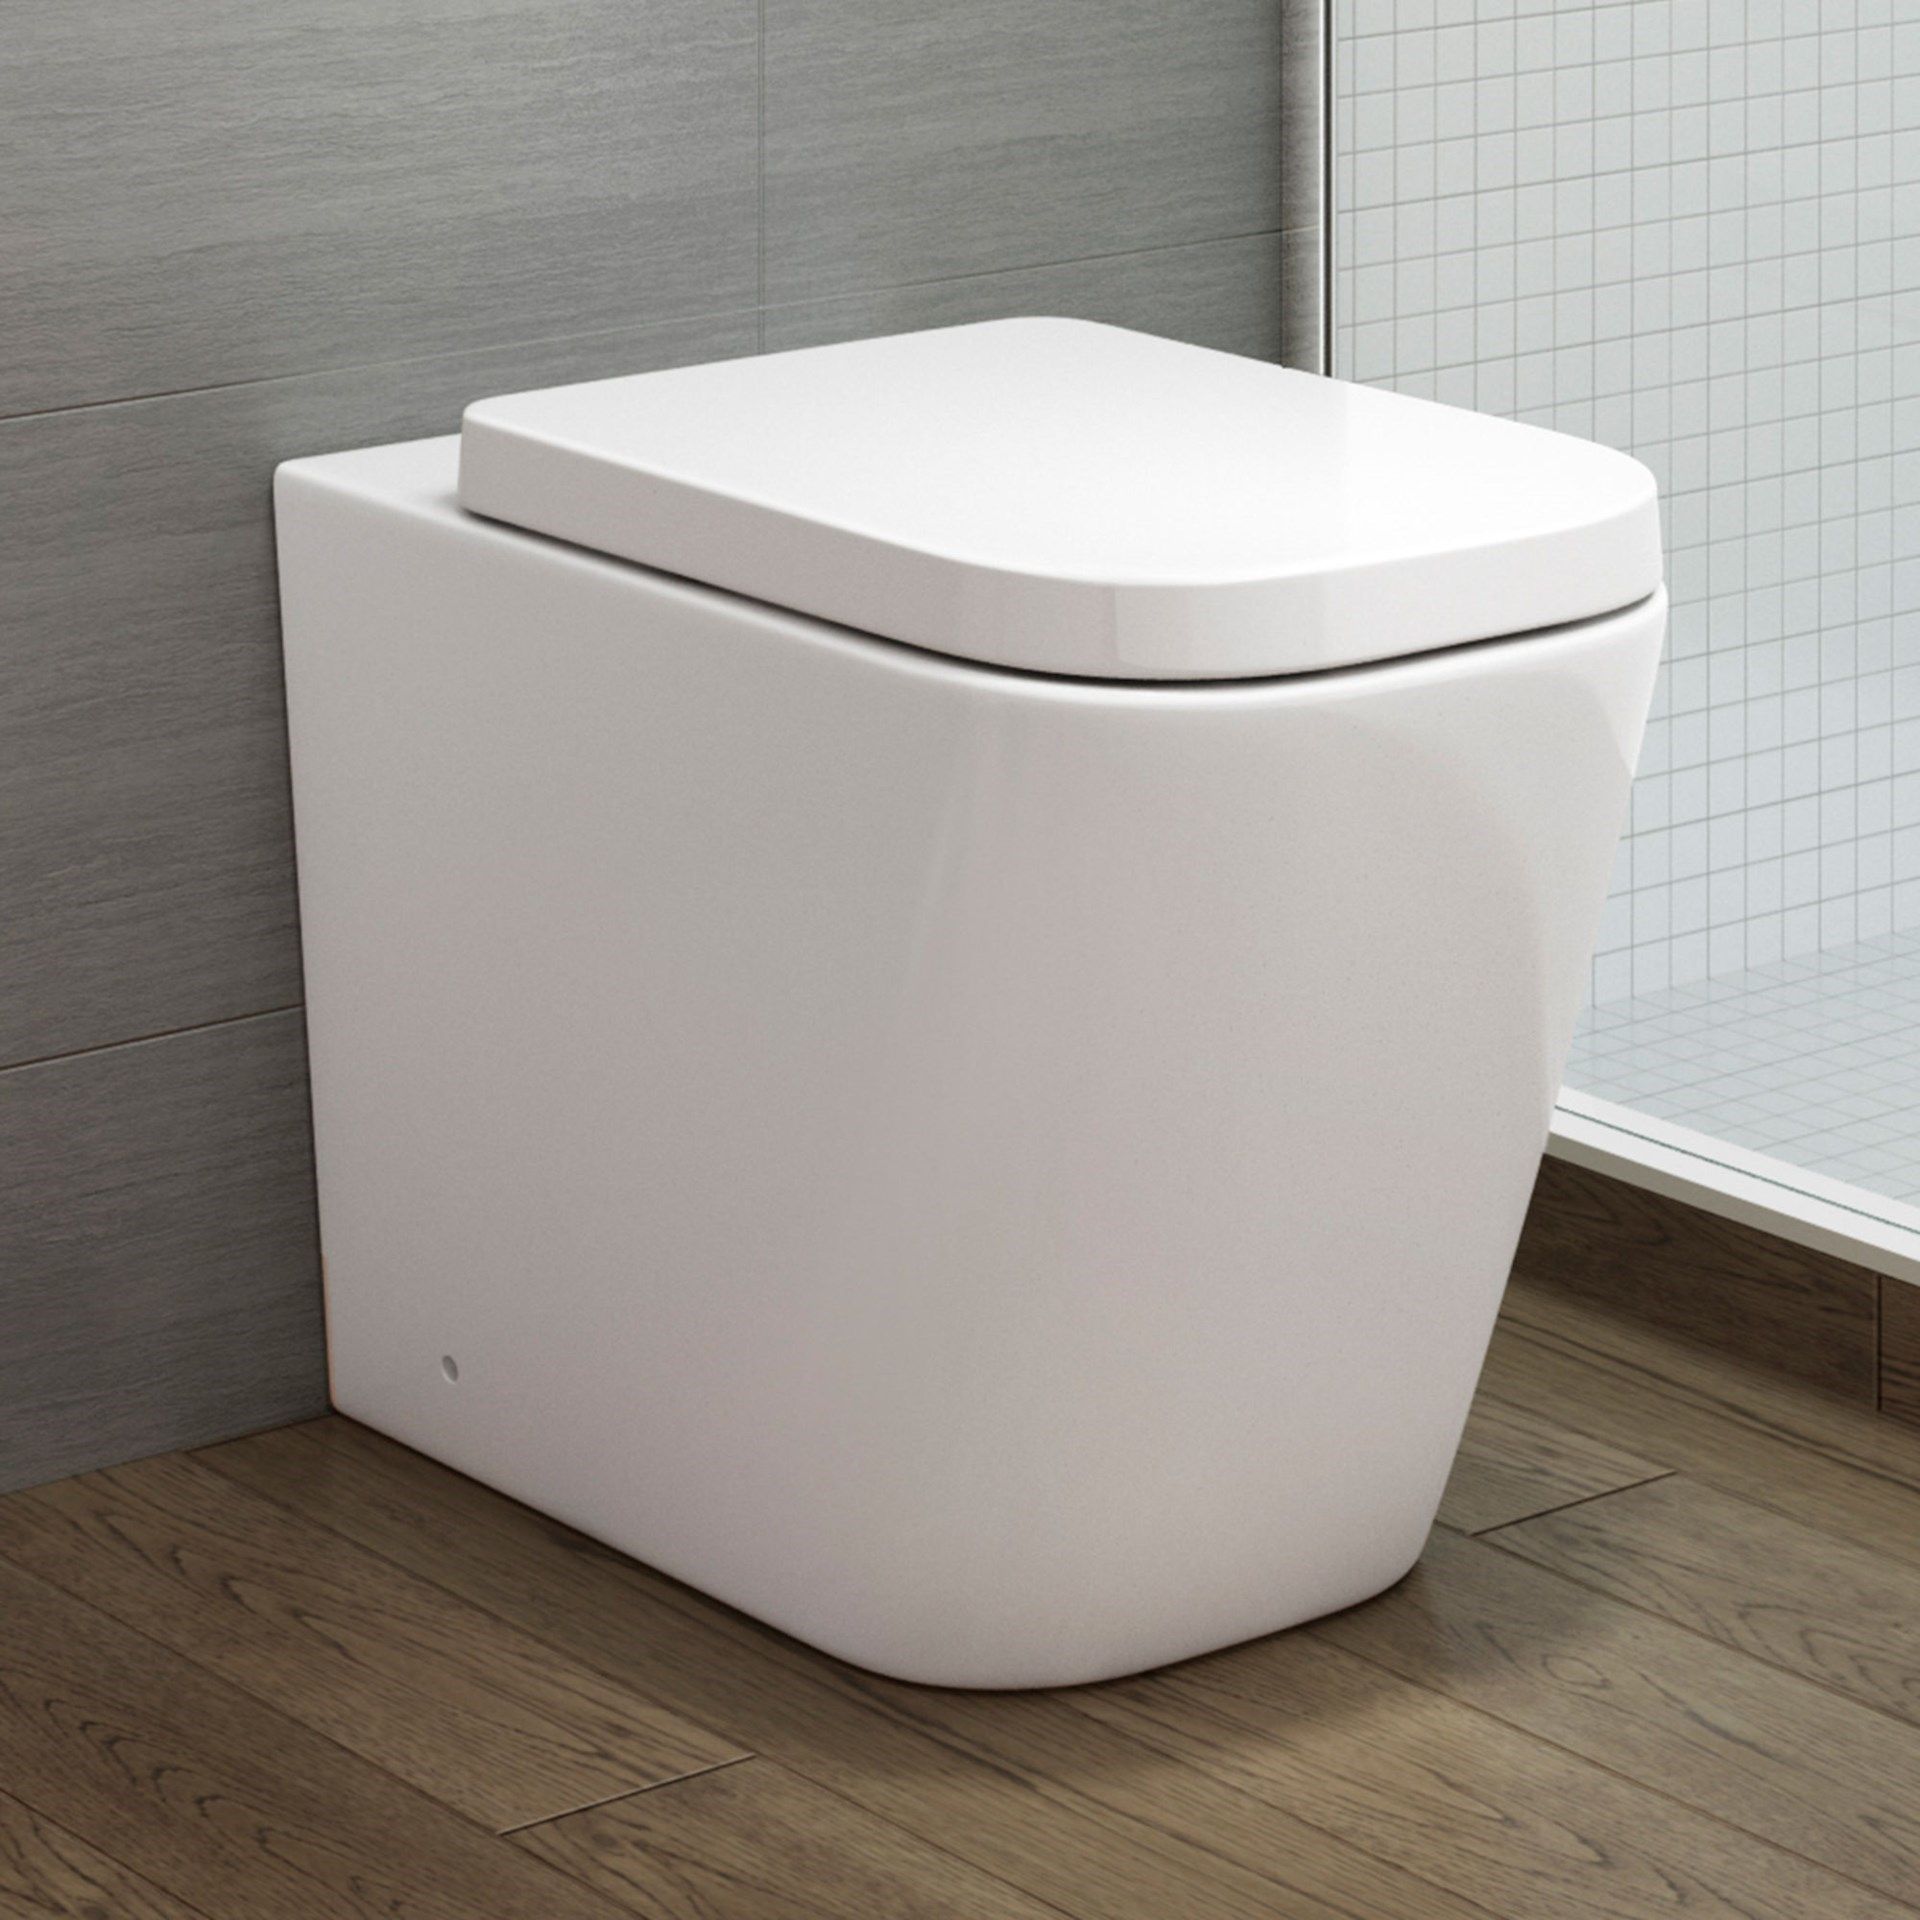 BRAND NEW BOXED Florence Rimless Back to Wall Toilet inc Luxury Soft Close Seat. RRP £349.99. ...